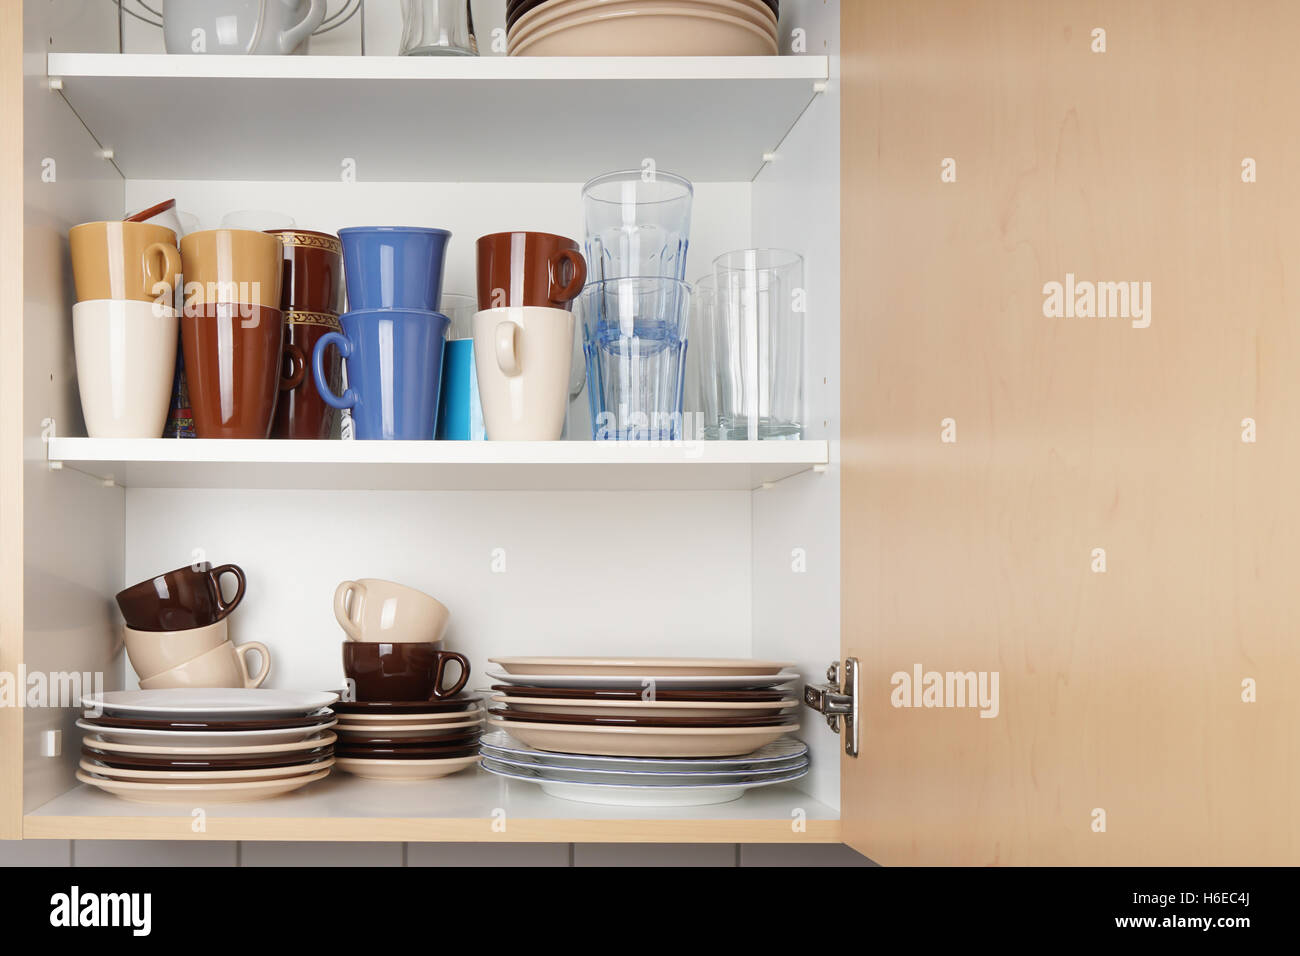 kitchen cabinet or cupboard for dishes Stock Photo